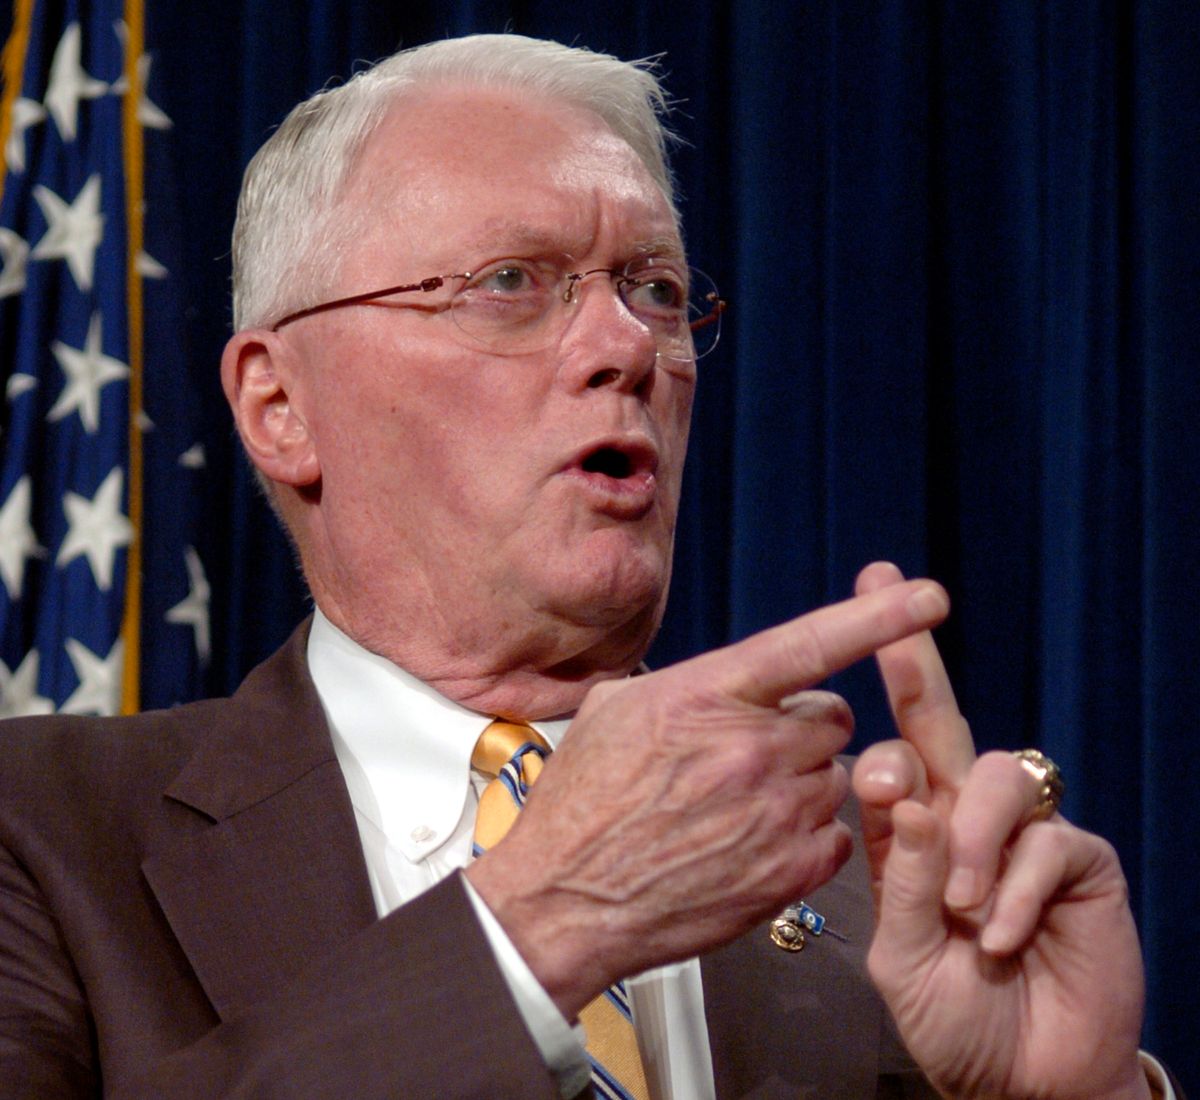 Sen. Jim Bunning (R-KY), a Hall of Fame pitcher, talks about progress made by the Major League Baseball in dealing with steroids in Washington November 15, 2005. Bunning said he was pleased that baseball had toughened its performance-enhancing drug standards, but that proposed legislation to deal with the problem would remain on the table in case the problem worsened. REUTERS/Jonathan Ernst  (Reuters)